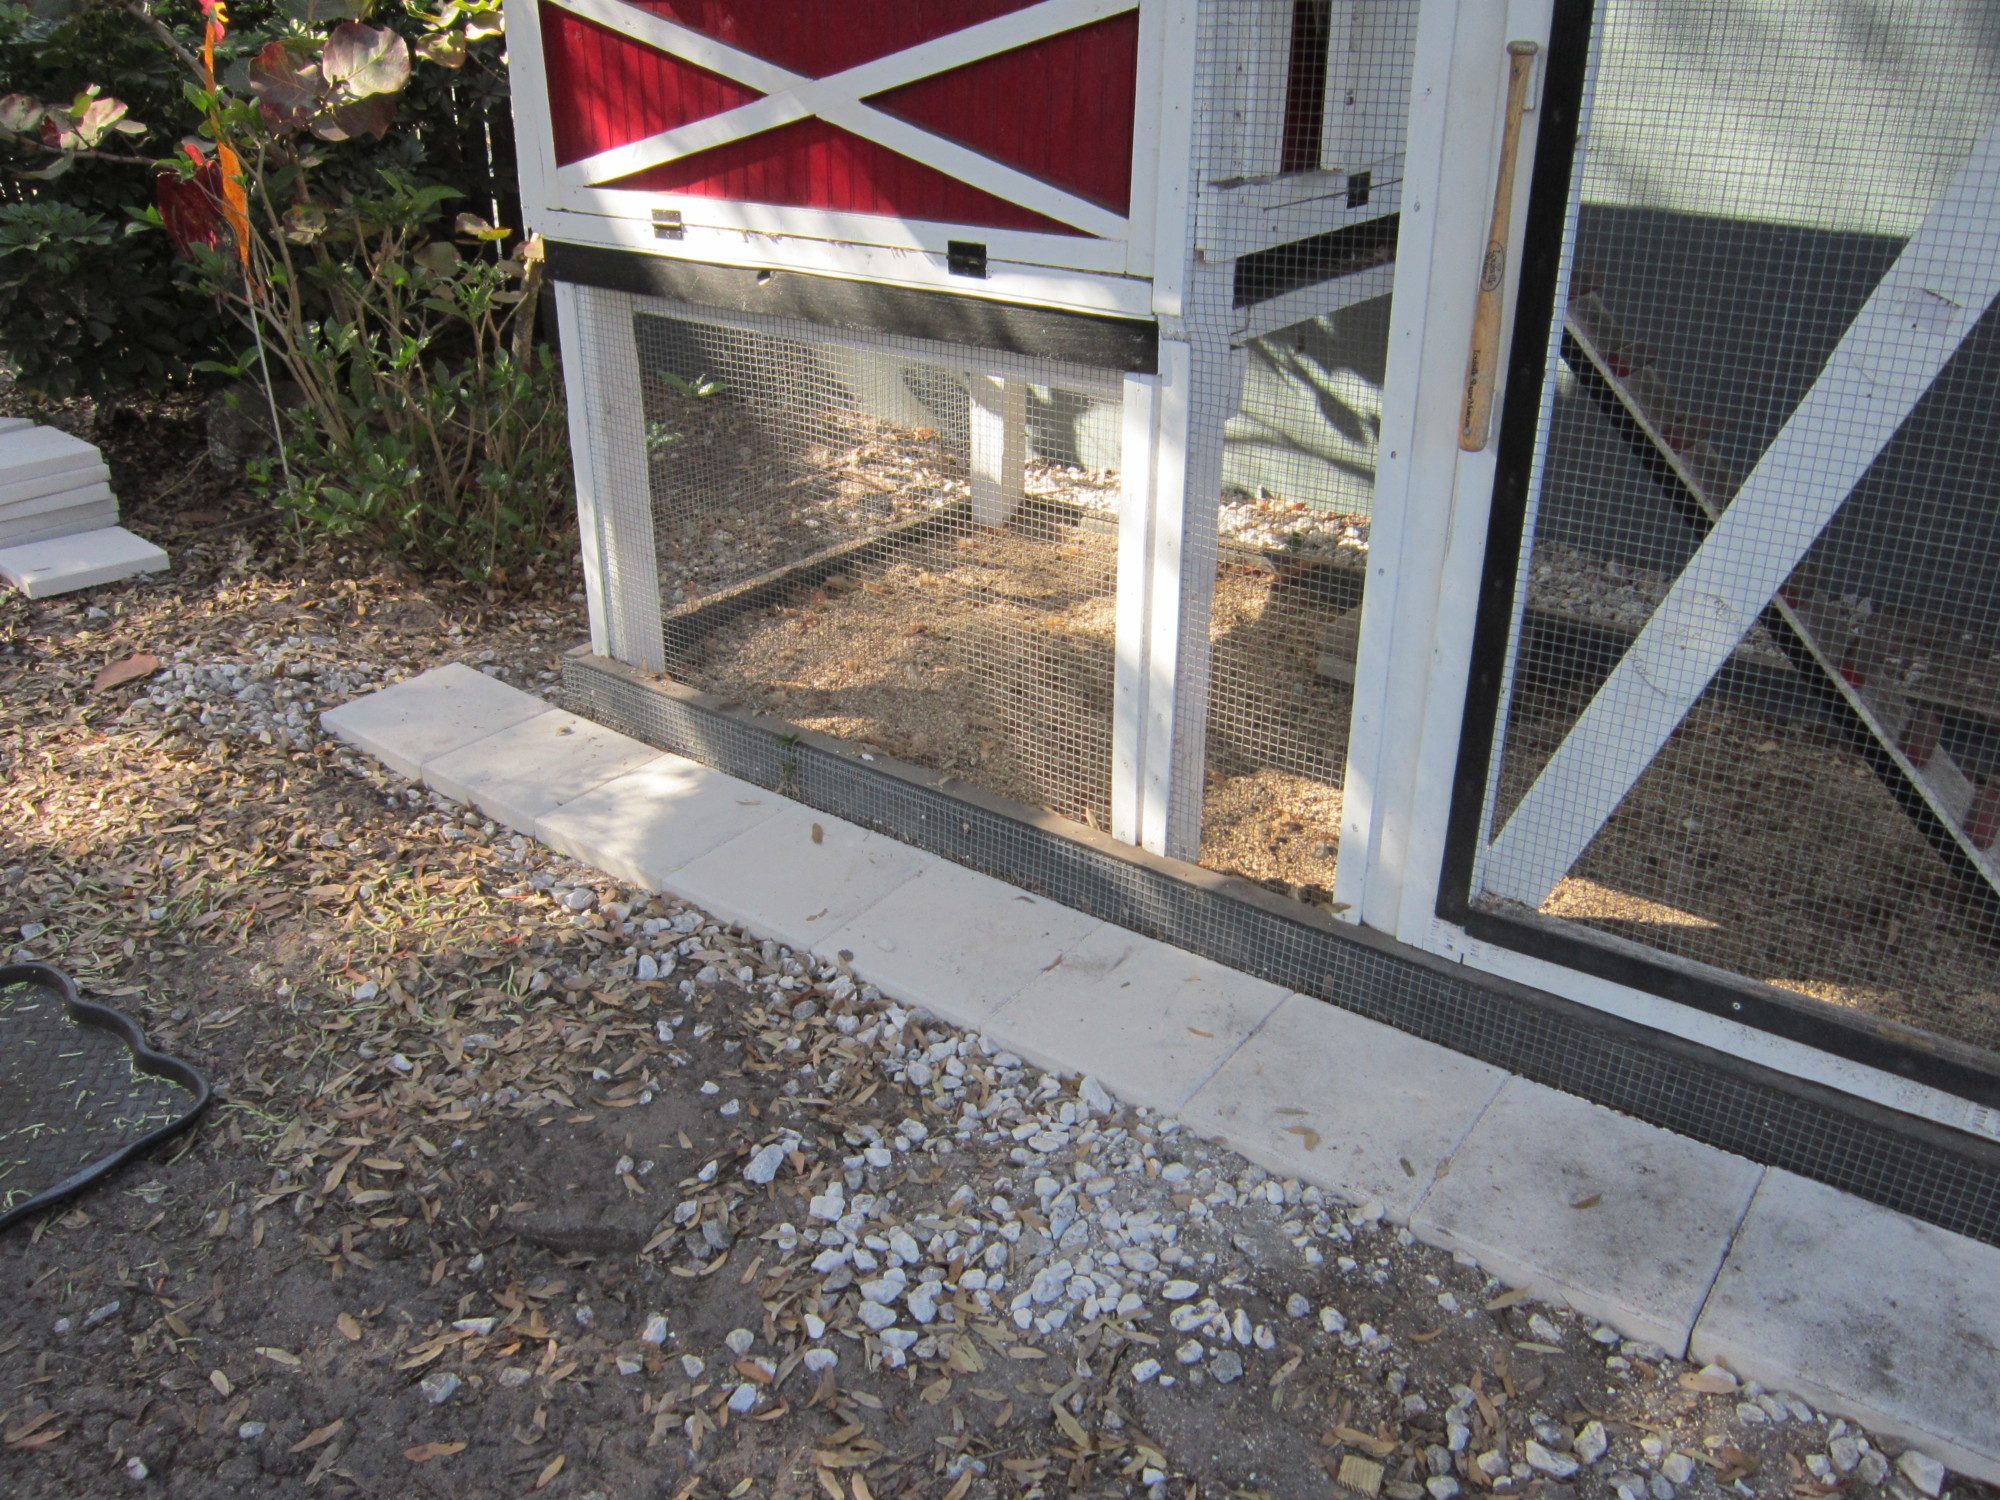 Replaced marble chips which wound up EVERYWHERE with concrete tiles. Let's see you
move those...oh God, I hope not!